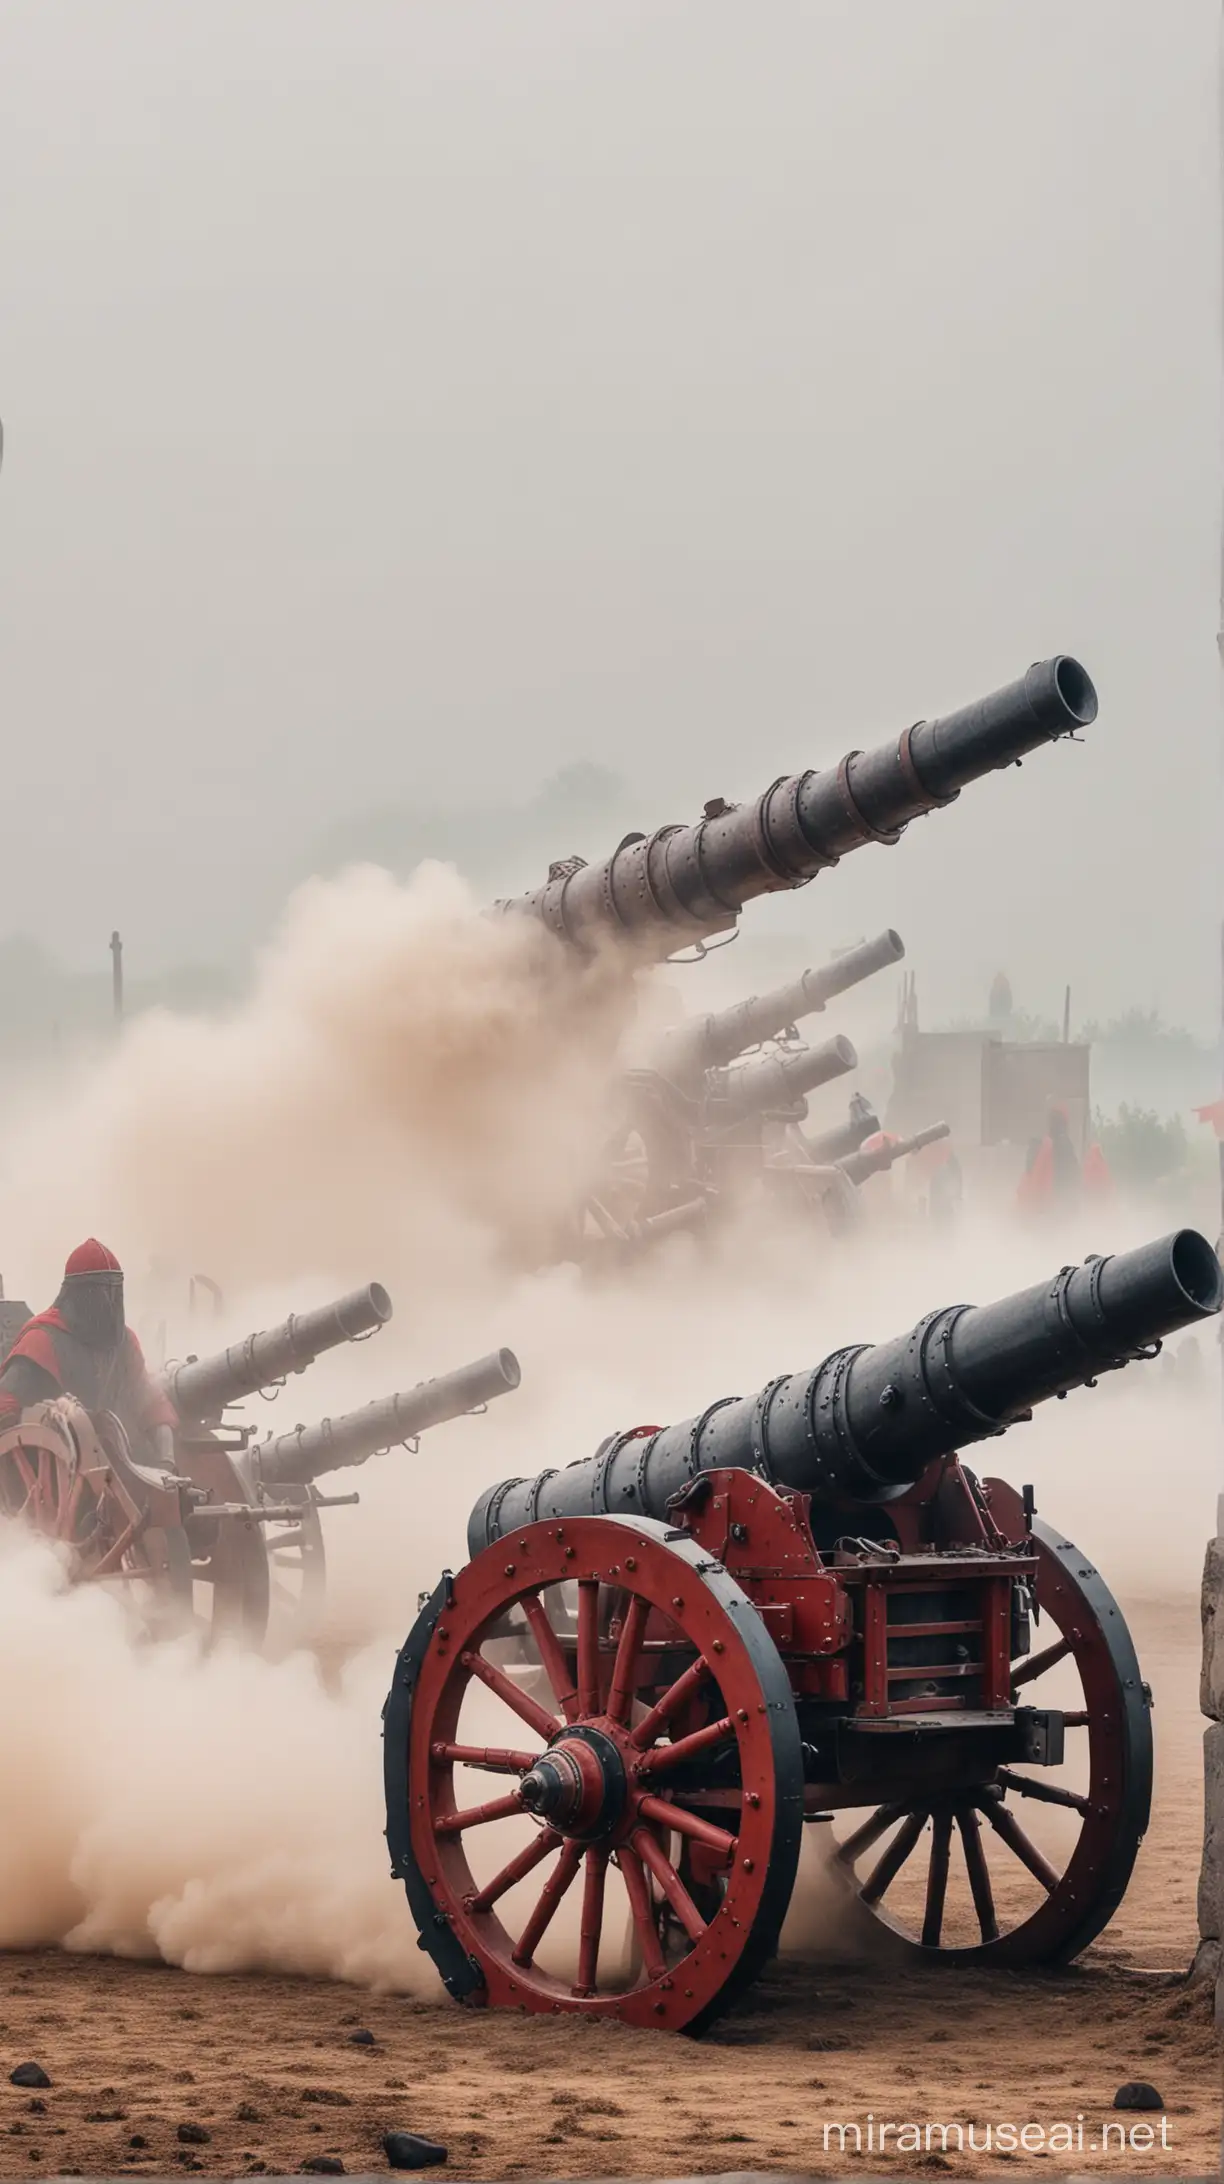 Many medieval cannons large cannons in a fogy area throwing by a man with red islamic armored medieval battle attire and war helmet